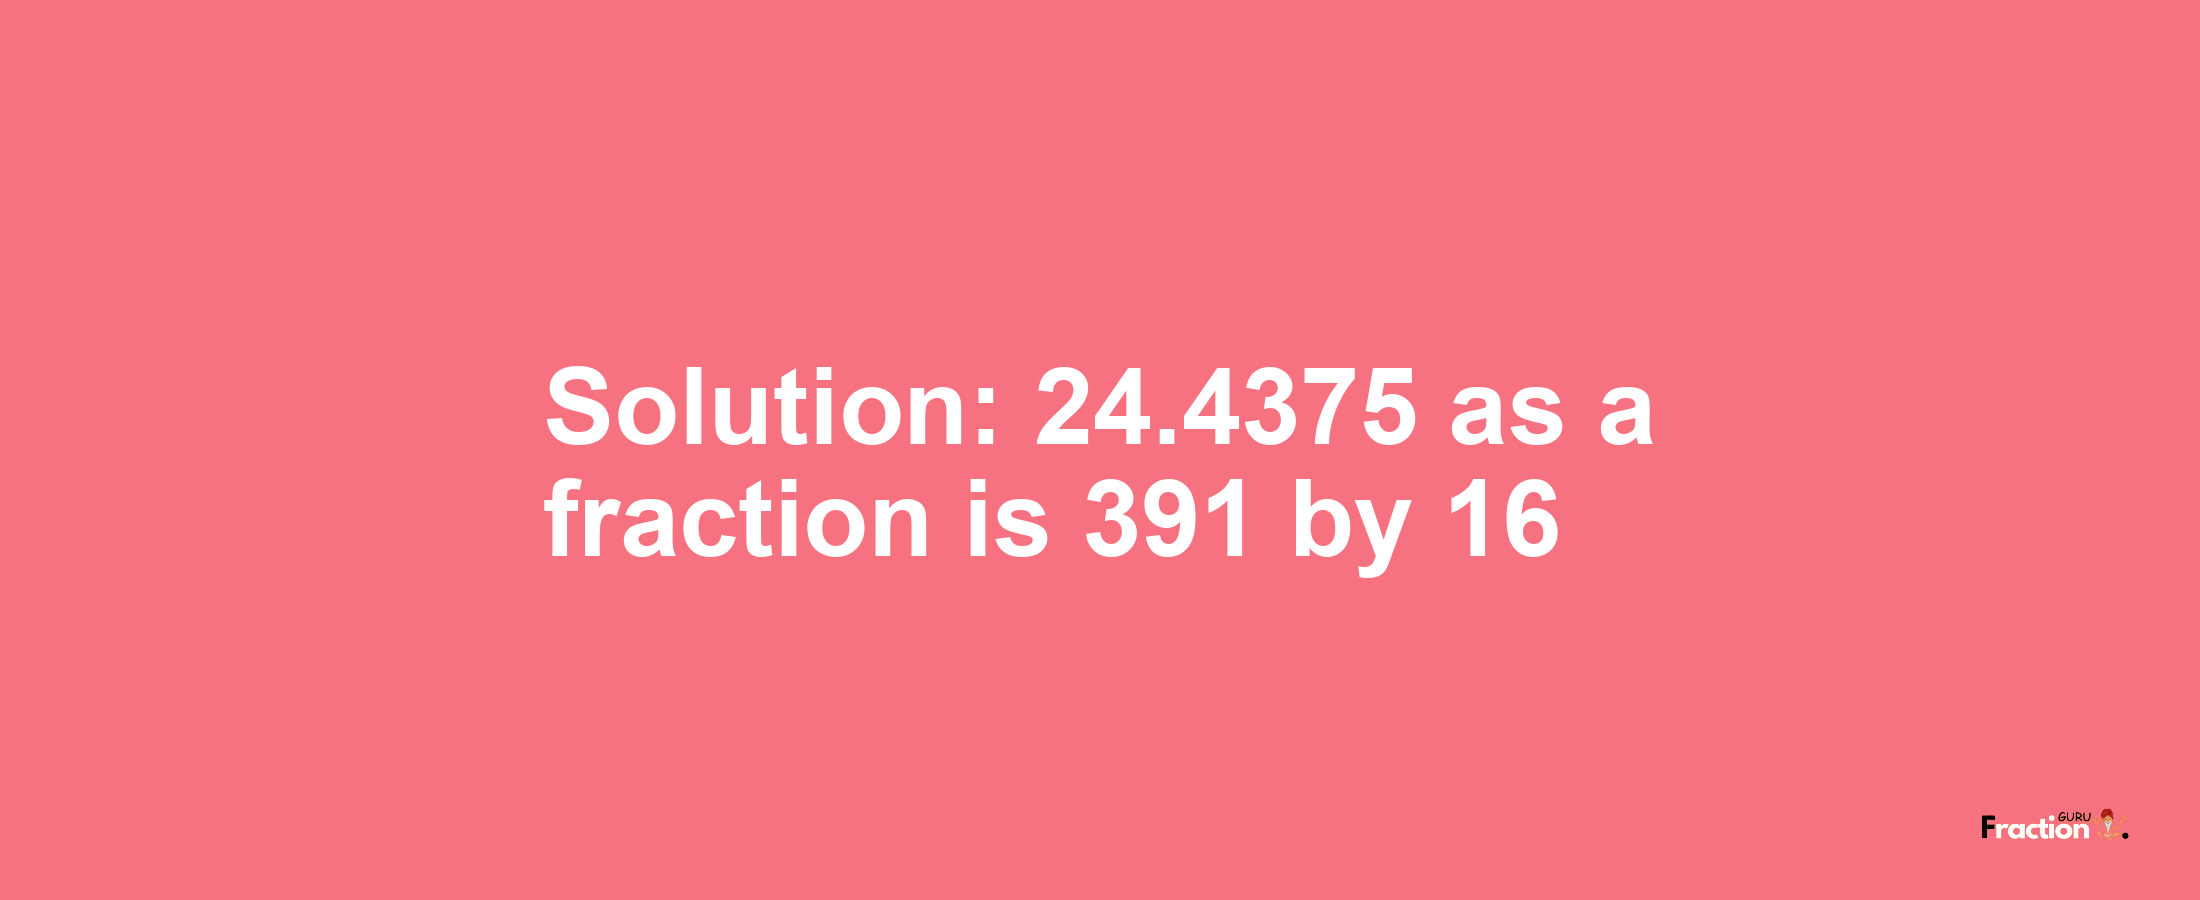 Solution:24.4375 as a fraction is 391/16